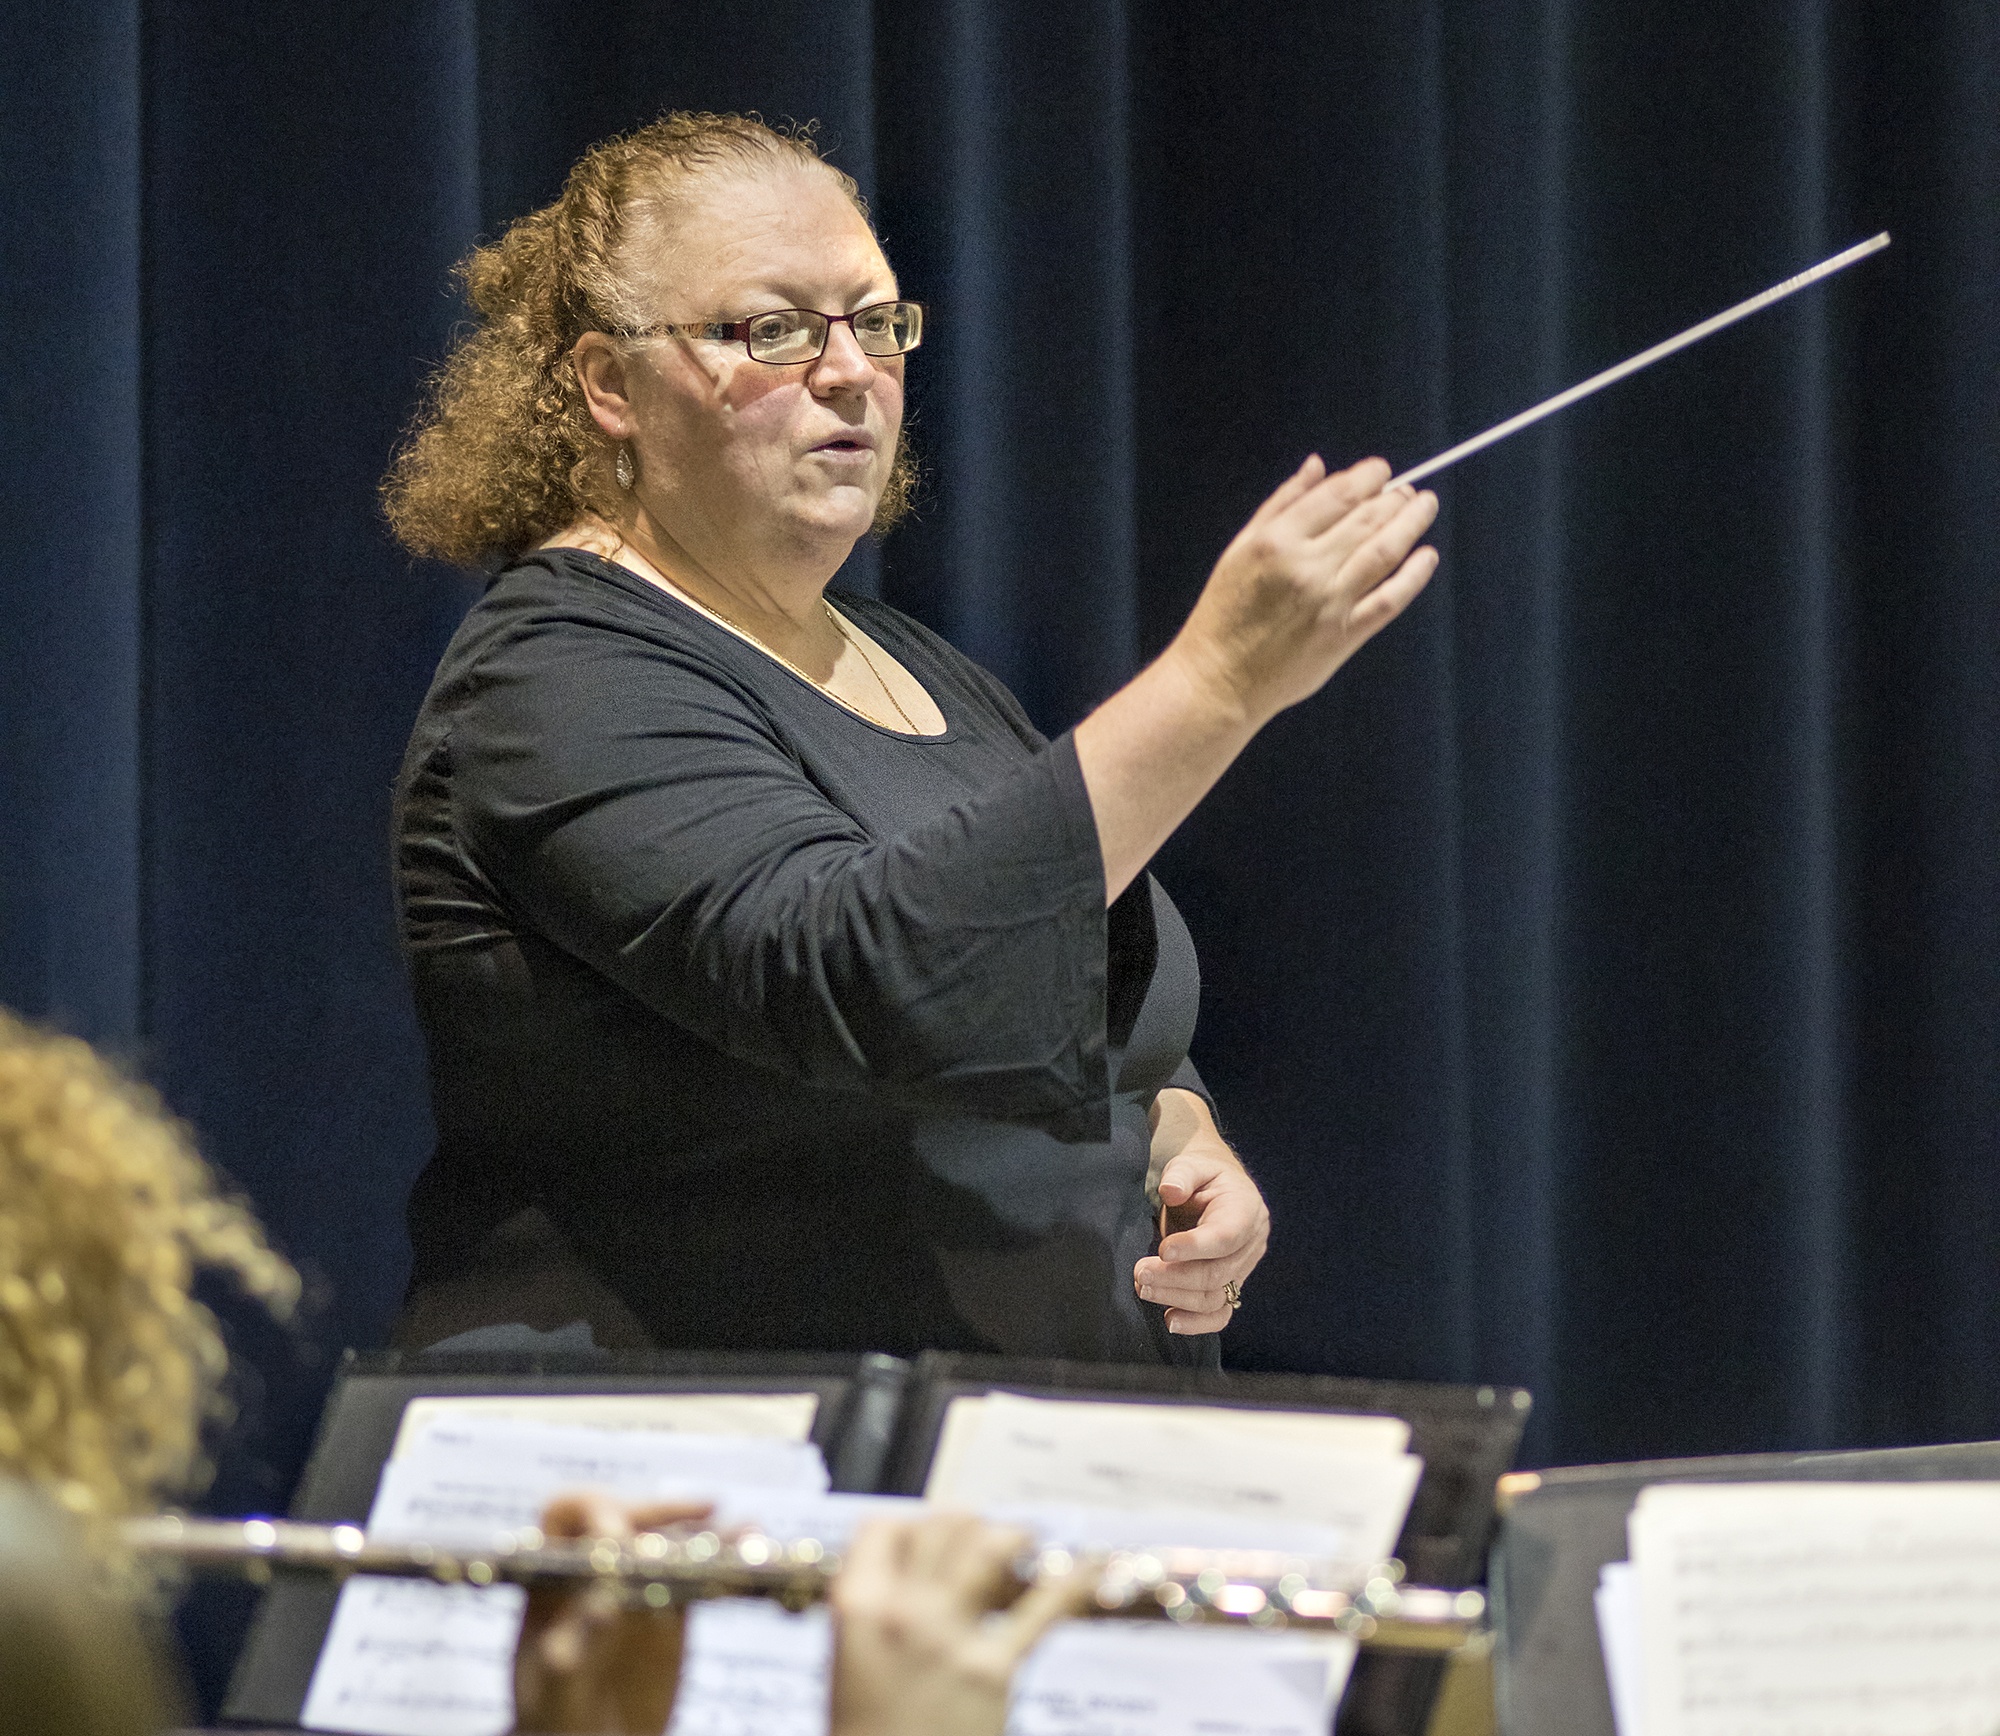 NEW LEADER - Dr. Karen Gustafson has been named the new conductor of the Symphonic Winds concert band.